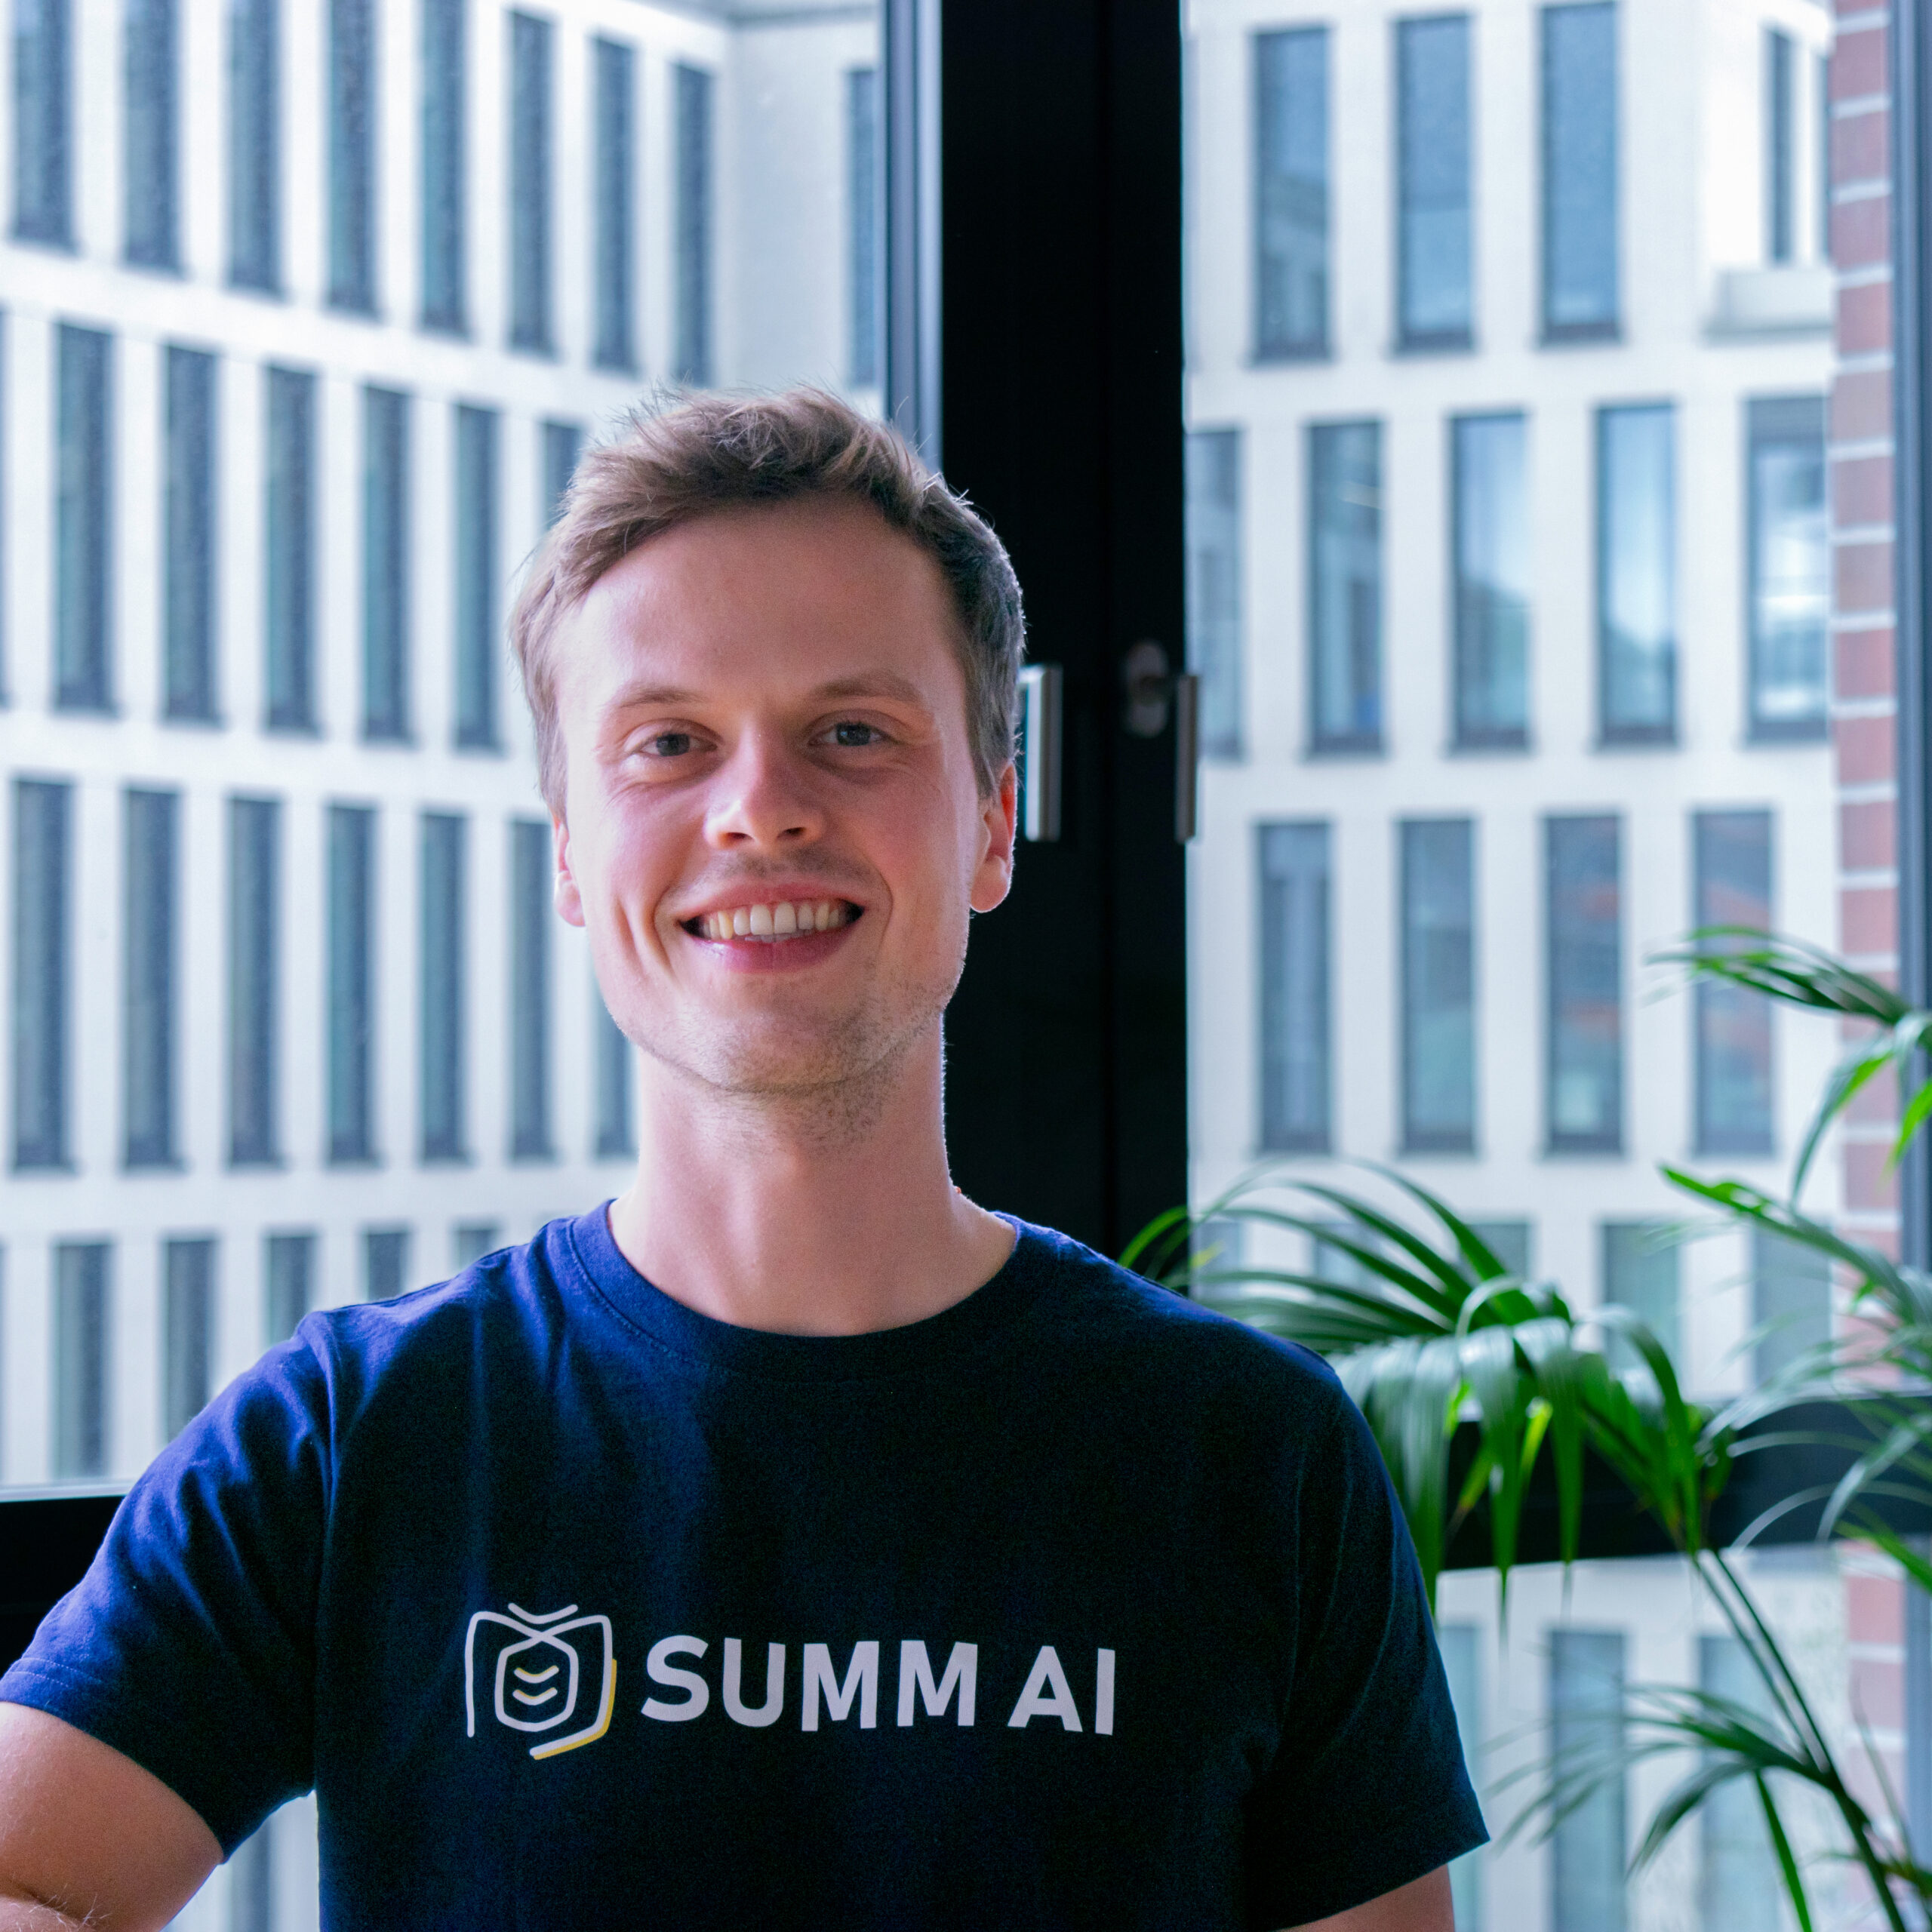 This is a picture of Nicholas. Nicholas is a co-founder of SUMM. Nicholas is CTO, which means Chief Technology Officer.